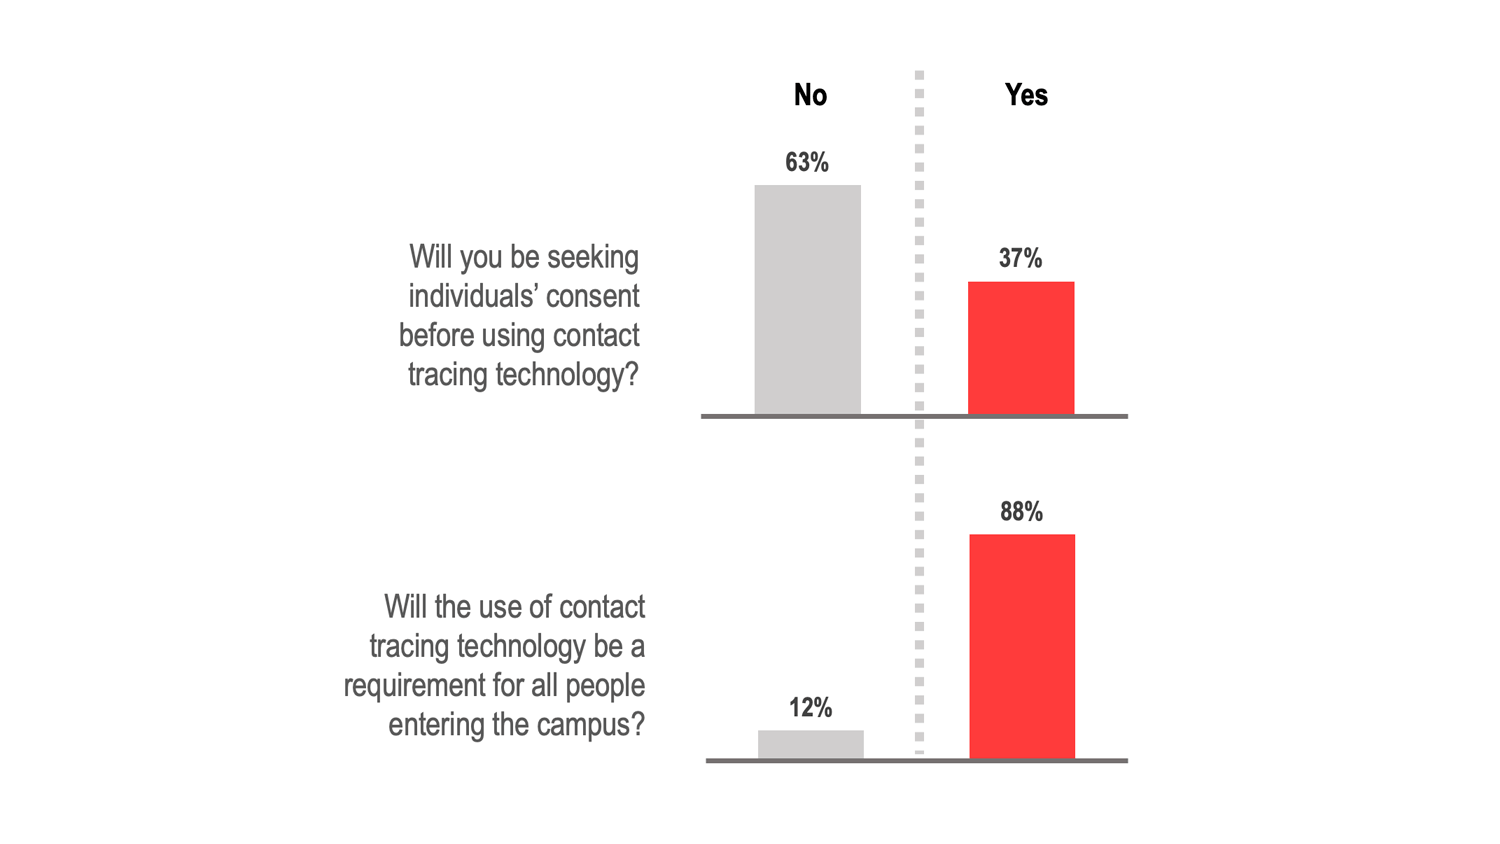 Responses to two questions.
1. Will you be seeking individuals' consent before using contact tracing technology? No 63%. Yes 37%.
2. Will the use of contact tracing technology be a requirement for all people entering the campus? No 12%. Yes 88%.